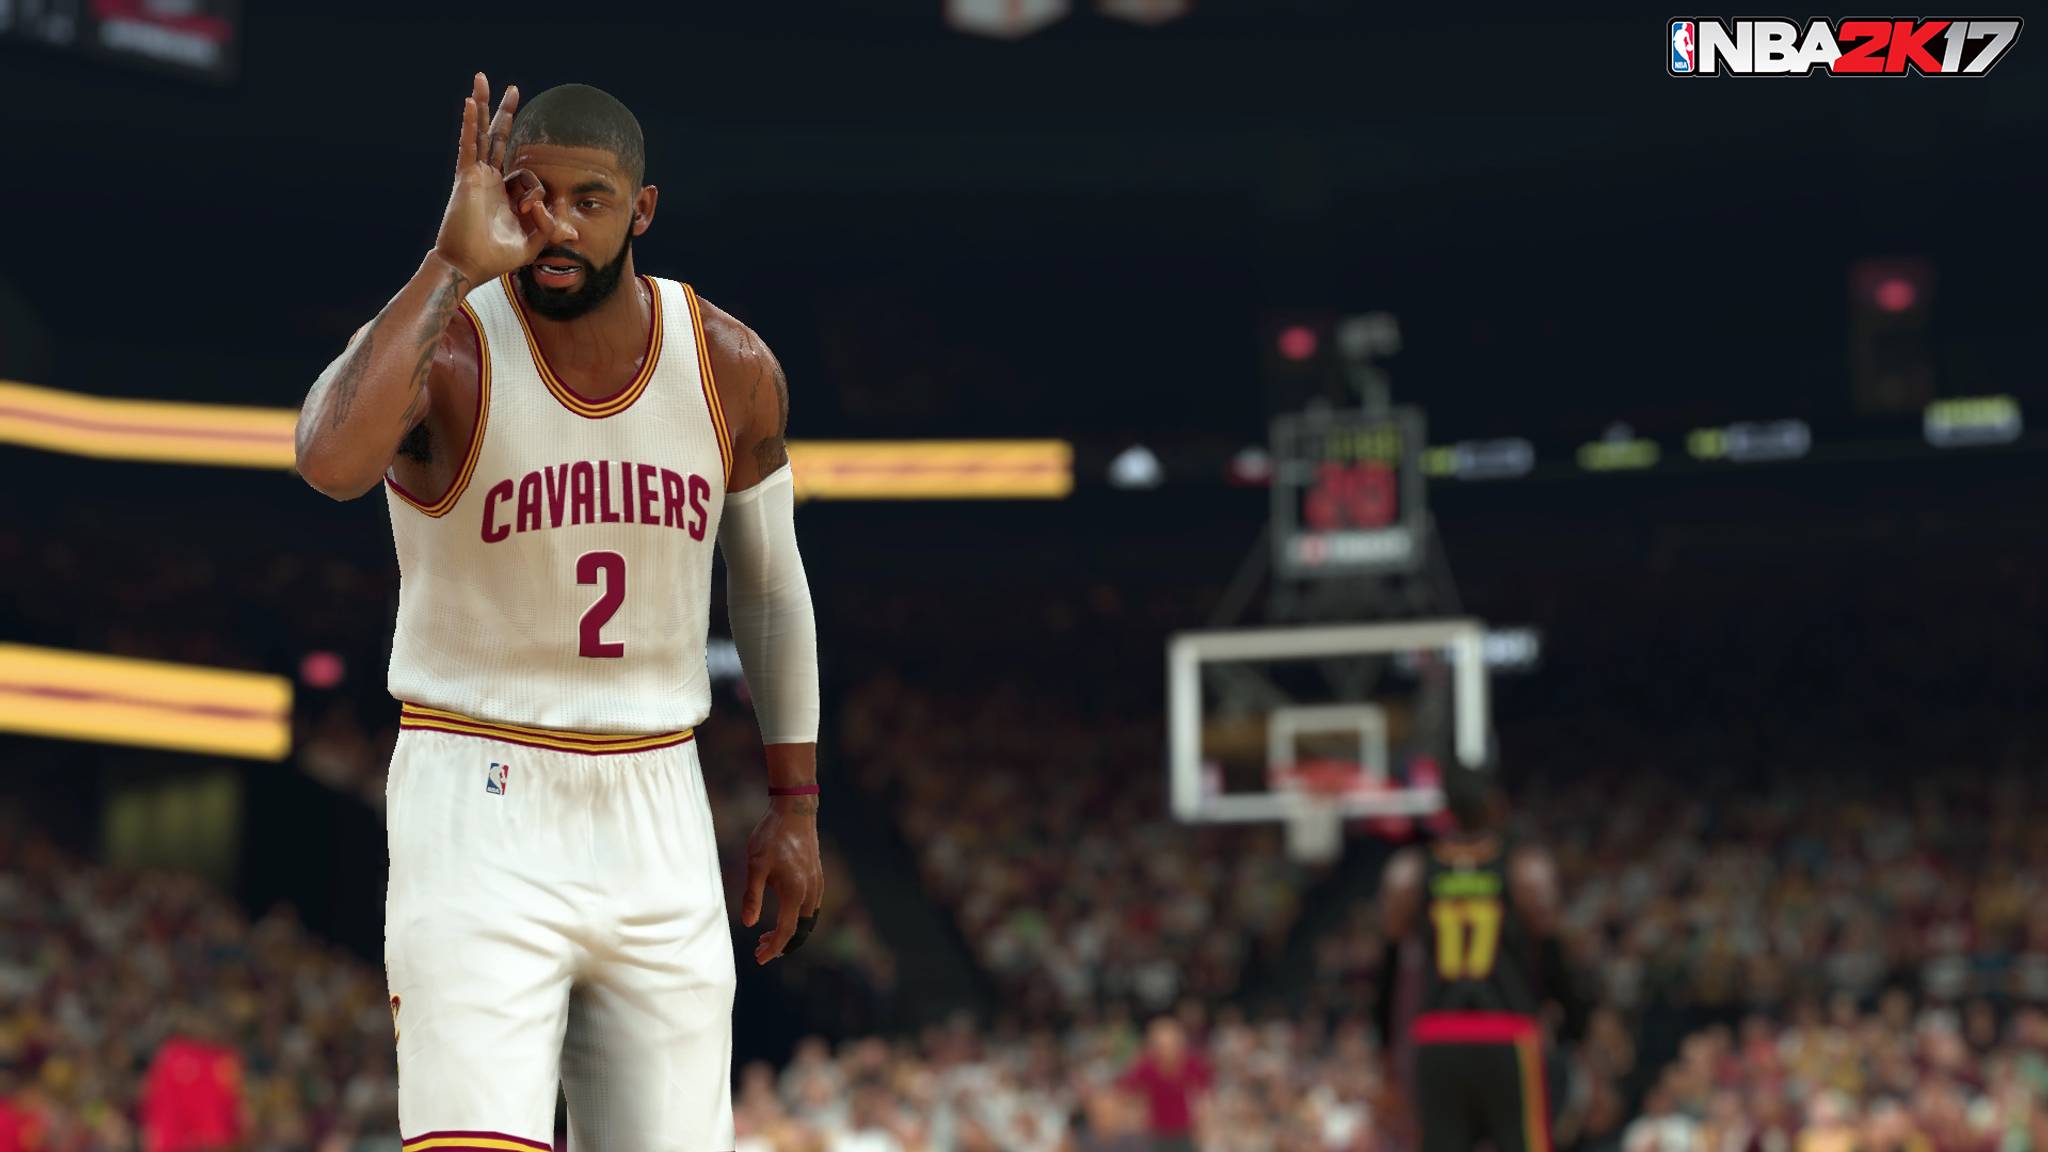 NBA 2K17 lets players import their own faces